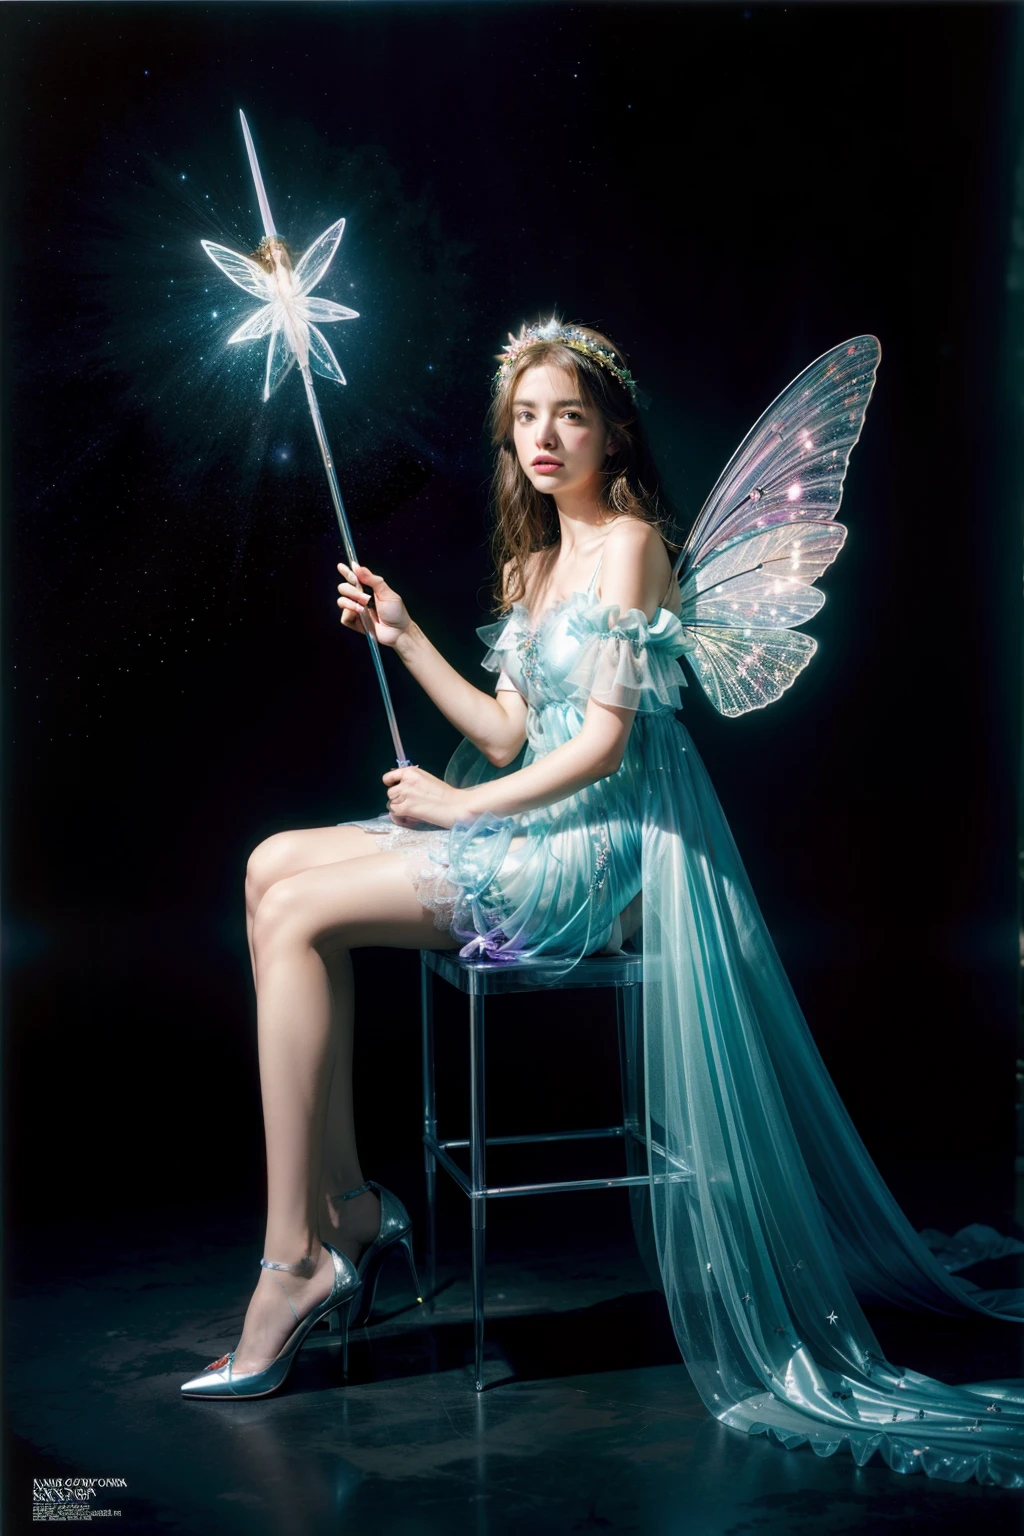 color photo of a mysterious flower fairy with transparent colorful wings, sitting in a divine light, with neon lights, holding a magic wand，axial symmetry, and a magnificent background.silver dress, high heels, flower crown, starry sky background, serene and enigmatic expression, Nikon Z7 II camera, Fujifilm Velvia 50 film, 50mm lens, high saturation, Tim Walker, David LaChapelle, Sofia Coppola, Valentino, Alexander McQueen